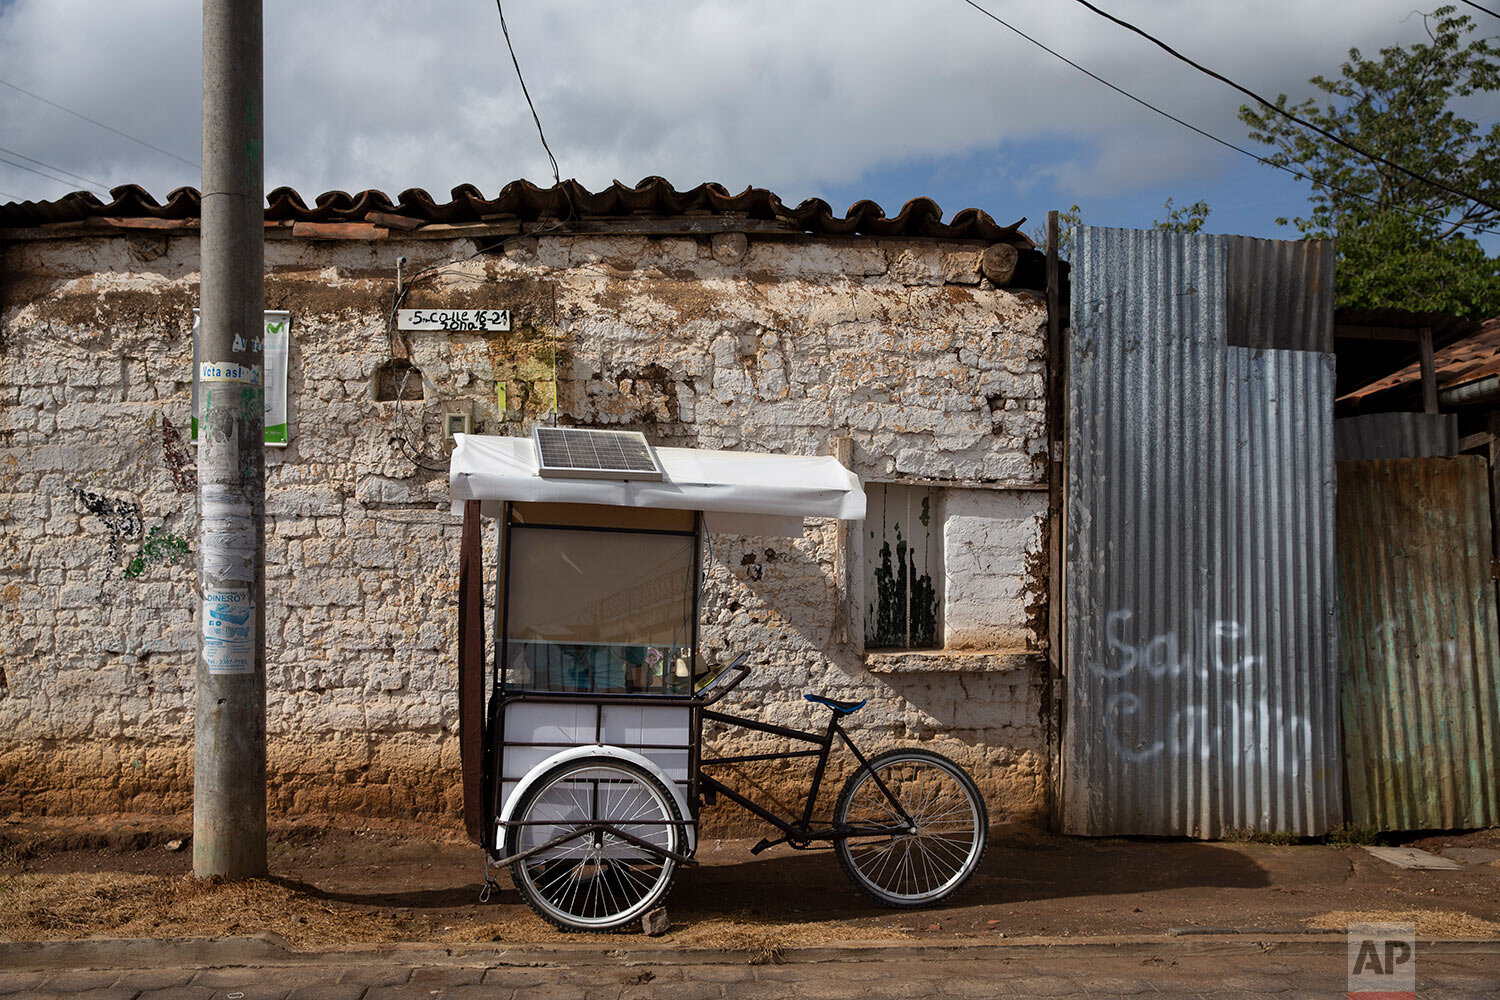  Teacher Gerardo Ixcoy sits parked just outside the doorway of a student's home, inside his secondhand adult tricycle he converted into a mobile classroom, in Santa Cruz del Quiche, Guatemala, Wednesday, July 15, 2020. Ixcoy has installed protective 